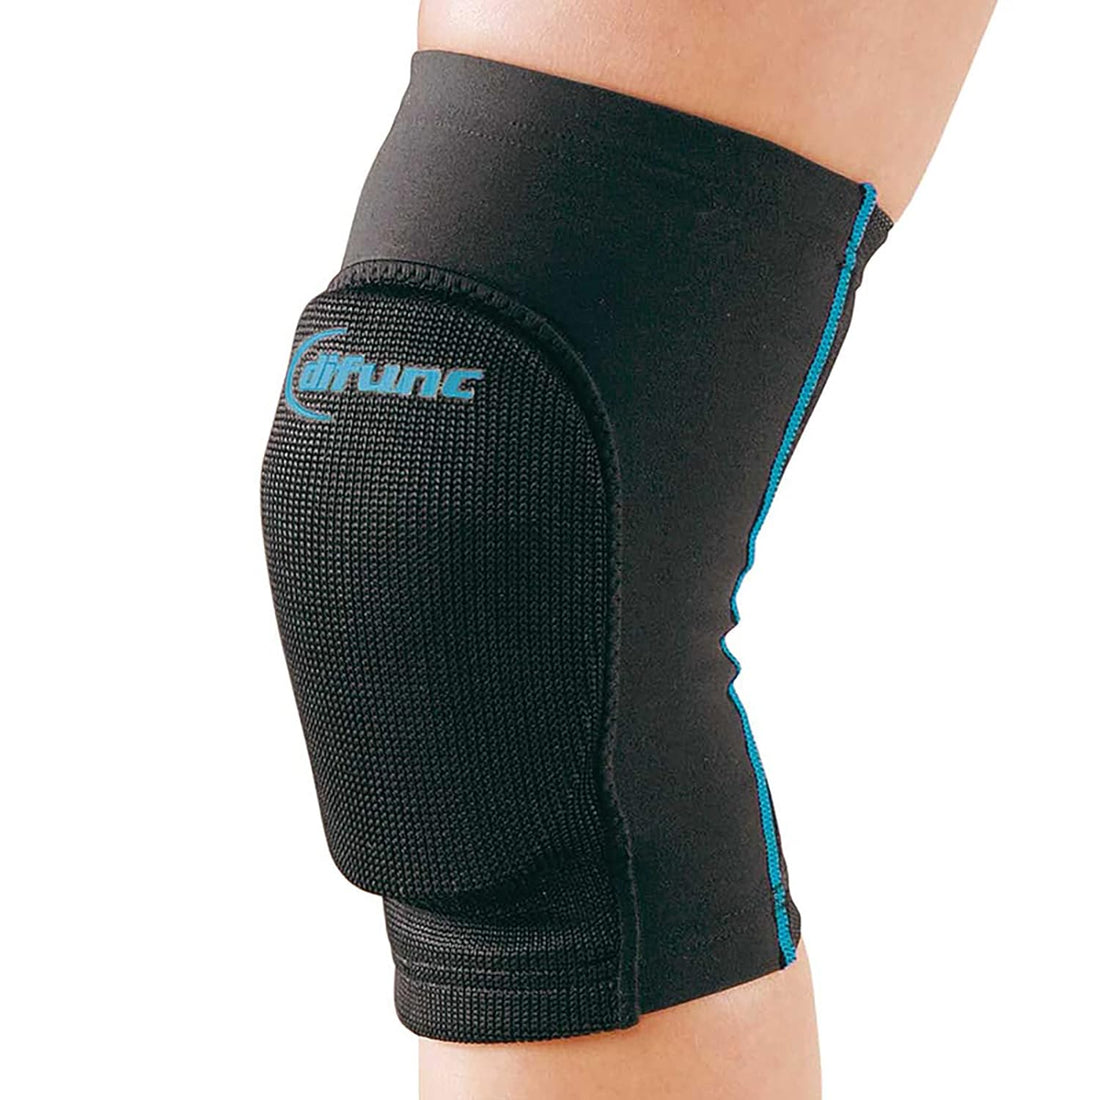 D&M Tricot Knee Pad sleeve, 12mm thick pad, 1pc, Made In Japan (Small, Black x Turquoise)